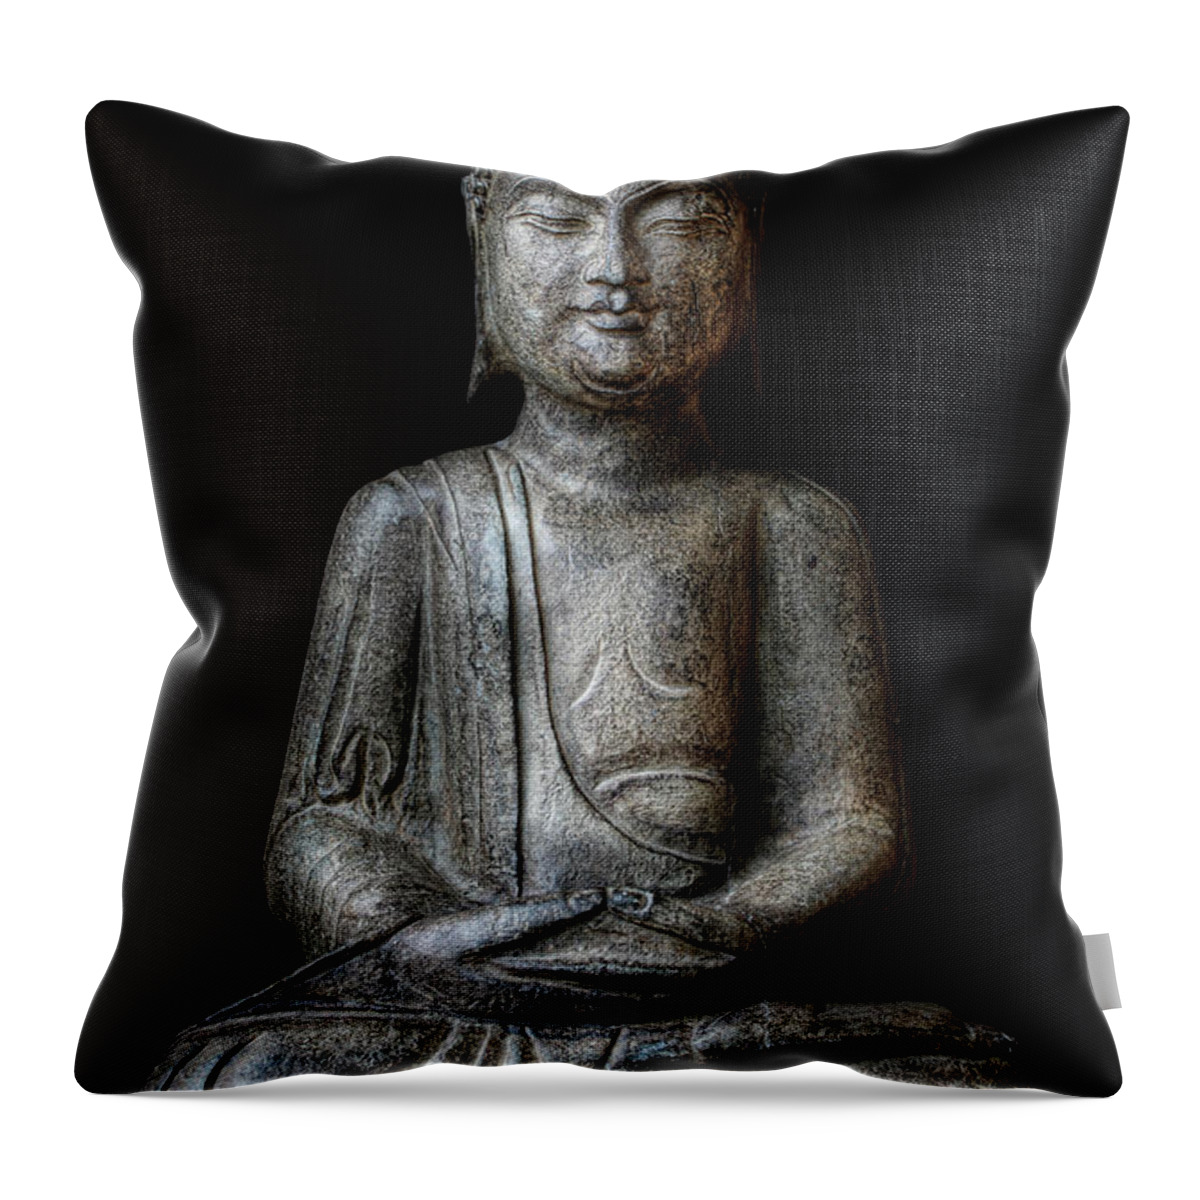 Statue Throw Pillow featuring the photograph Meditating Buddha by T.light